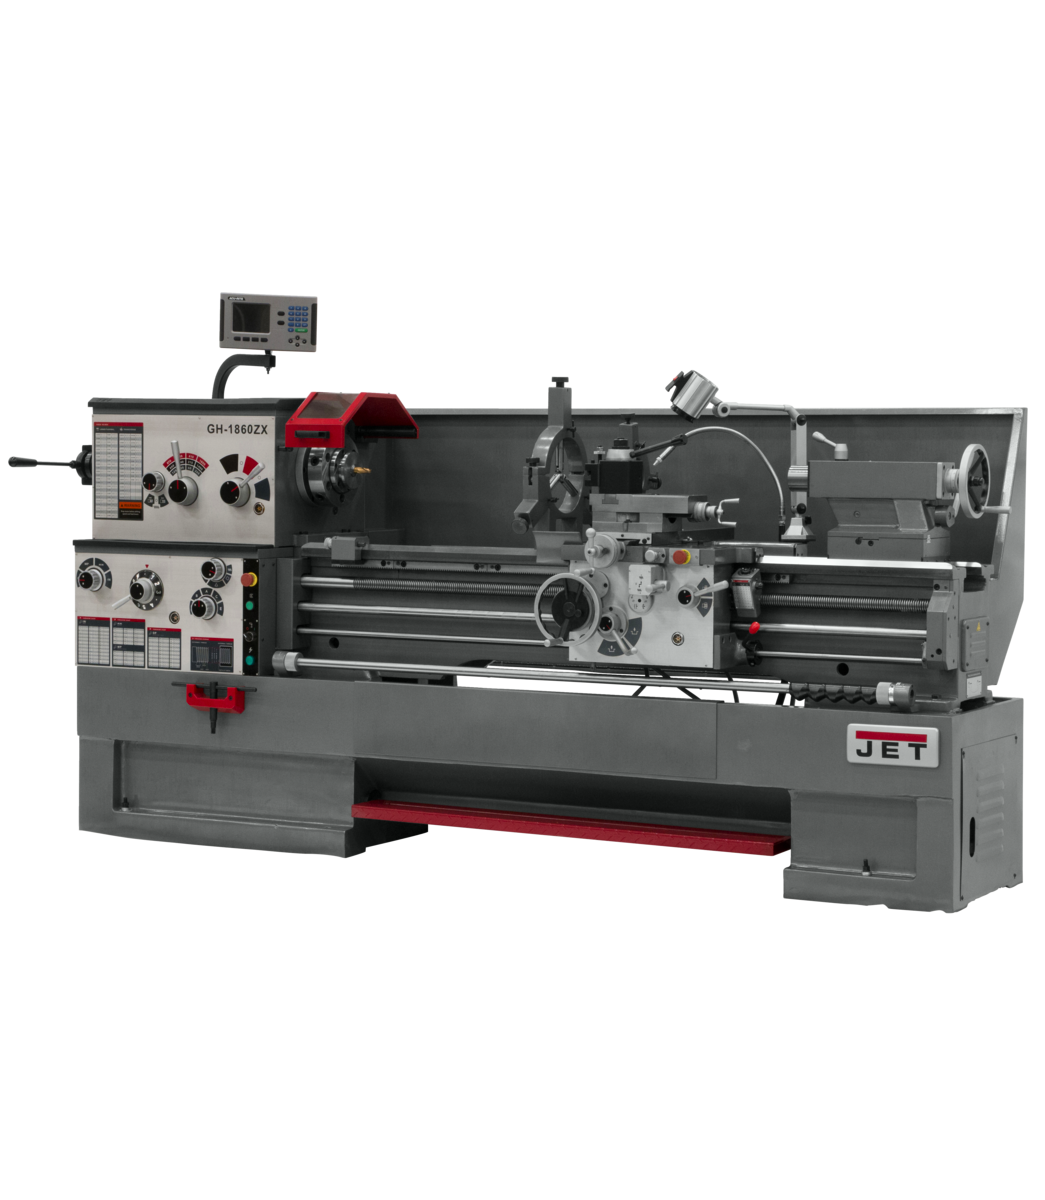 321505, GH-1860ZX Lathe with 2-axis ACU-RITE 203 DRO Taper Attachment and Collet Closer Installed, Jet, Metalworking, Turning, Lathes